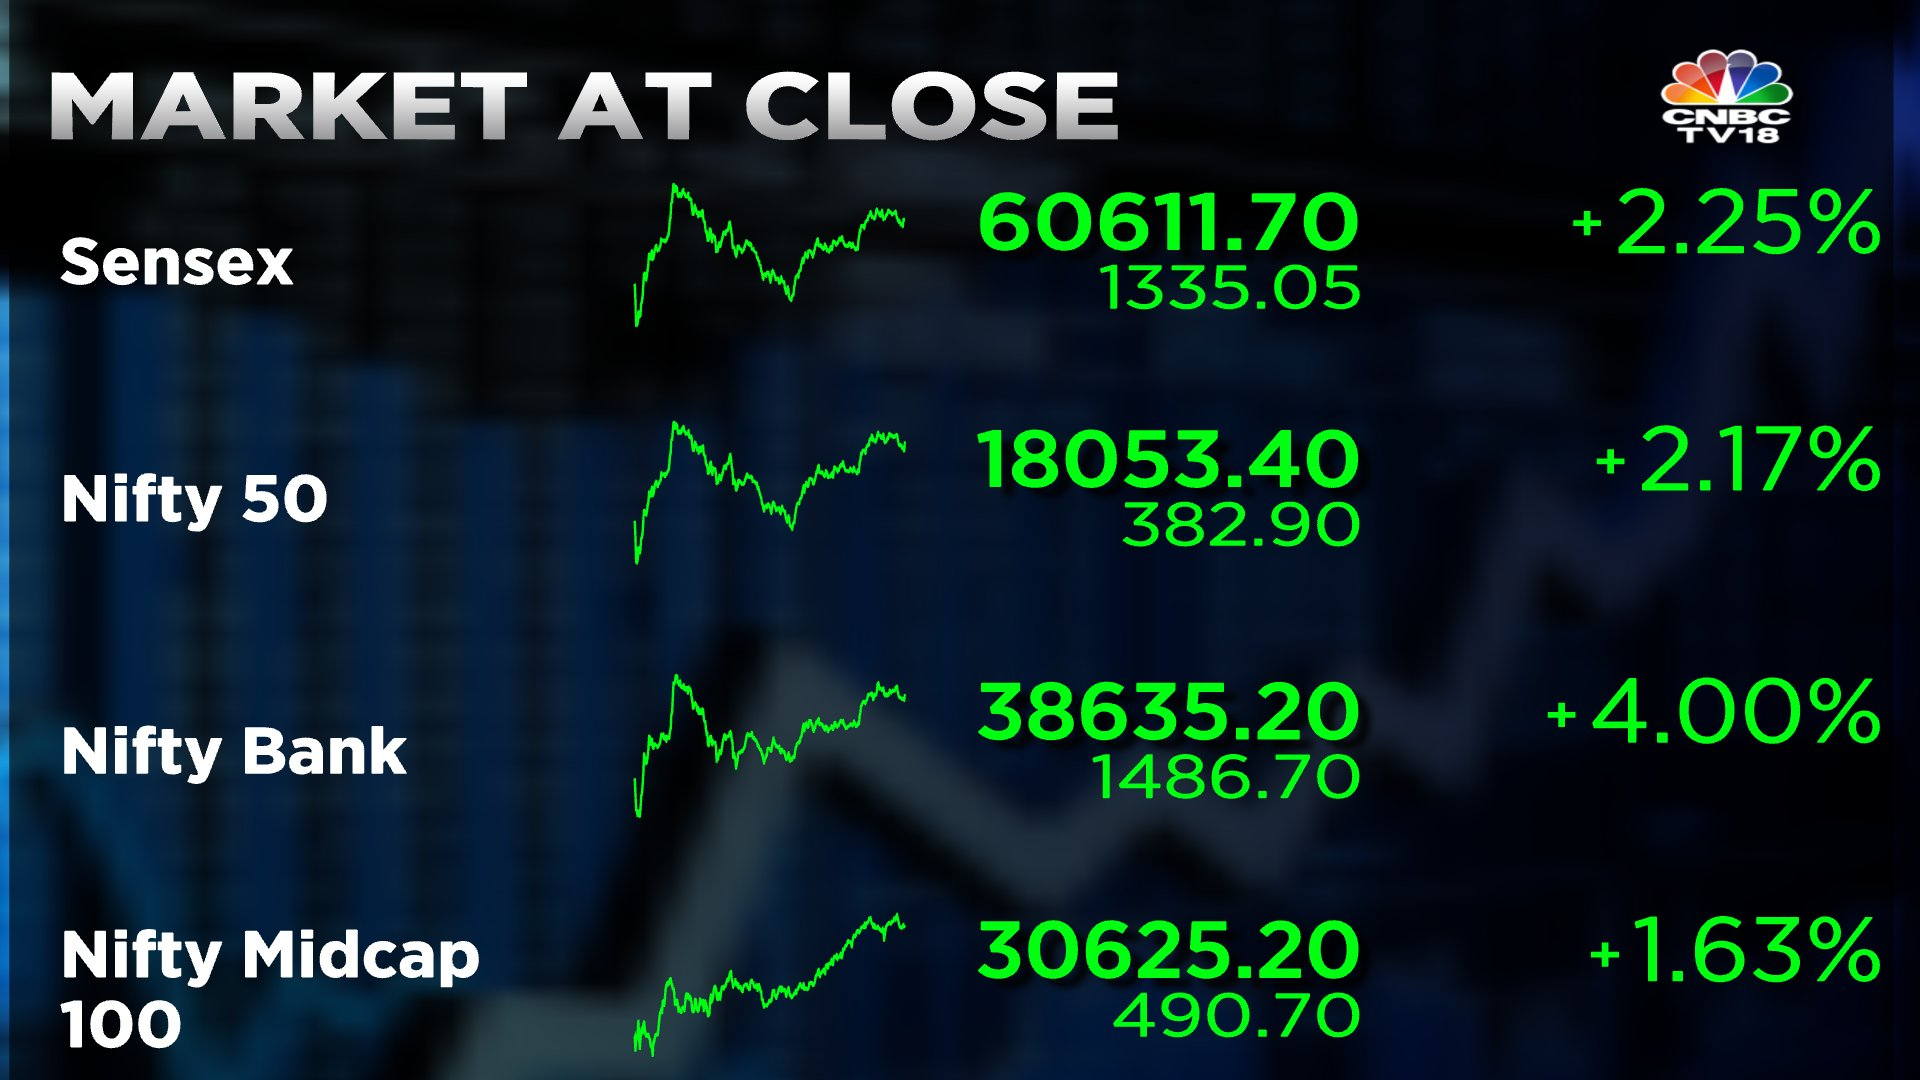 Stock Market Highlights: Sensex zooms 1,335 pts, Nifty50 reclaims 18,050; HDFC twins surge on merger boost